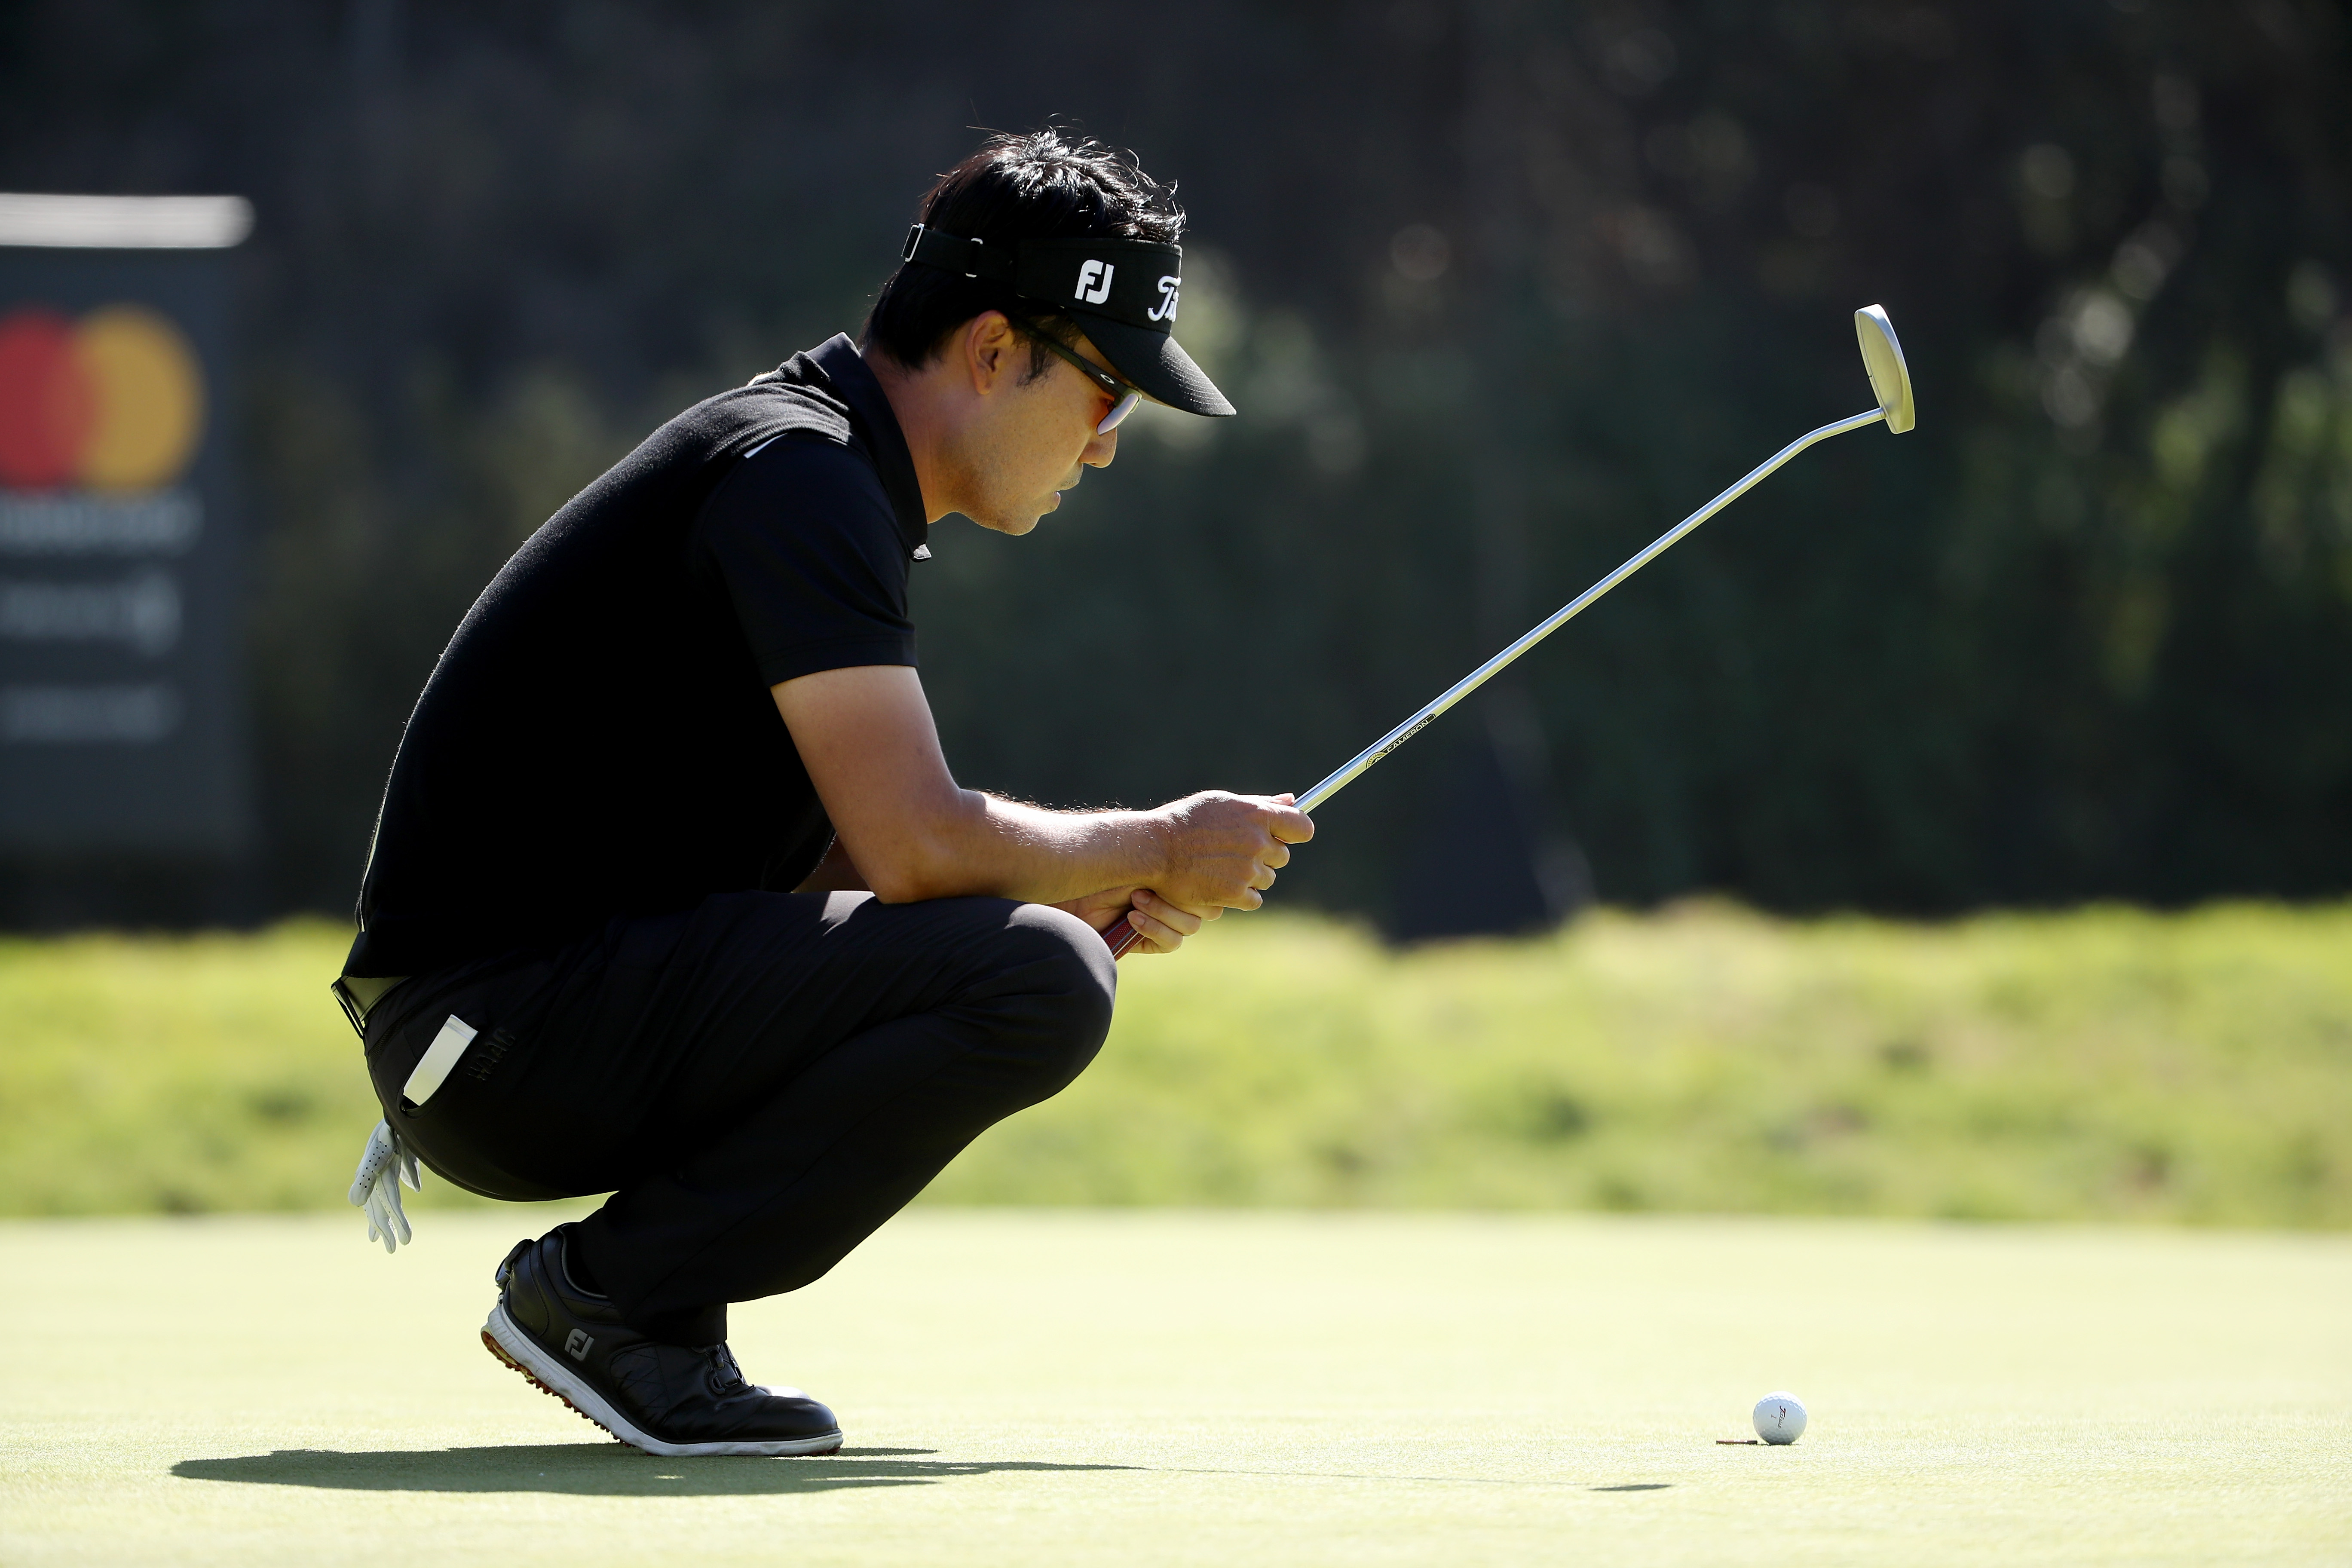 Kevin Pietersen gets p***** off with Kevin Na's slow play!